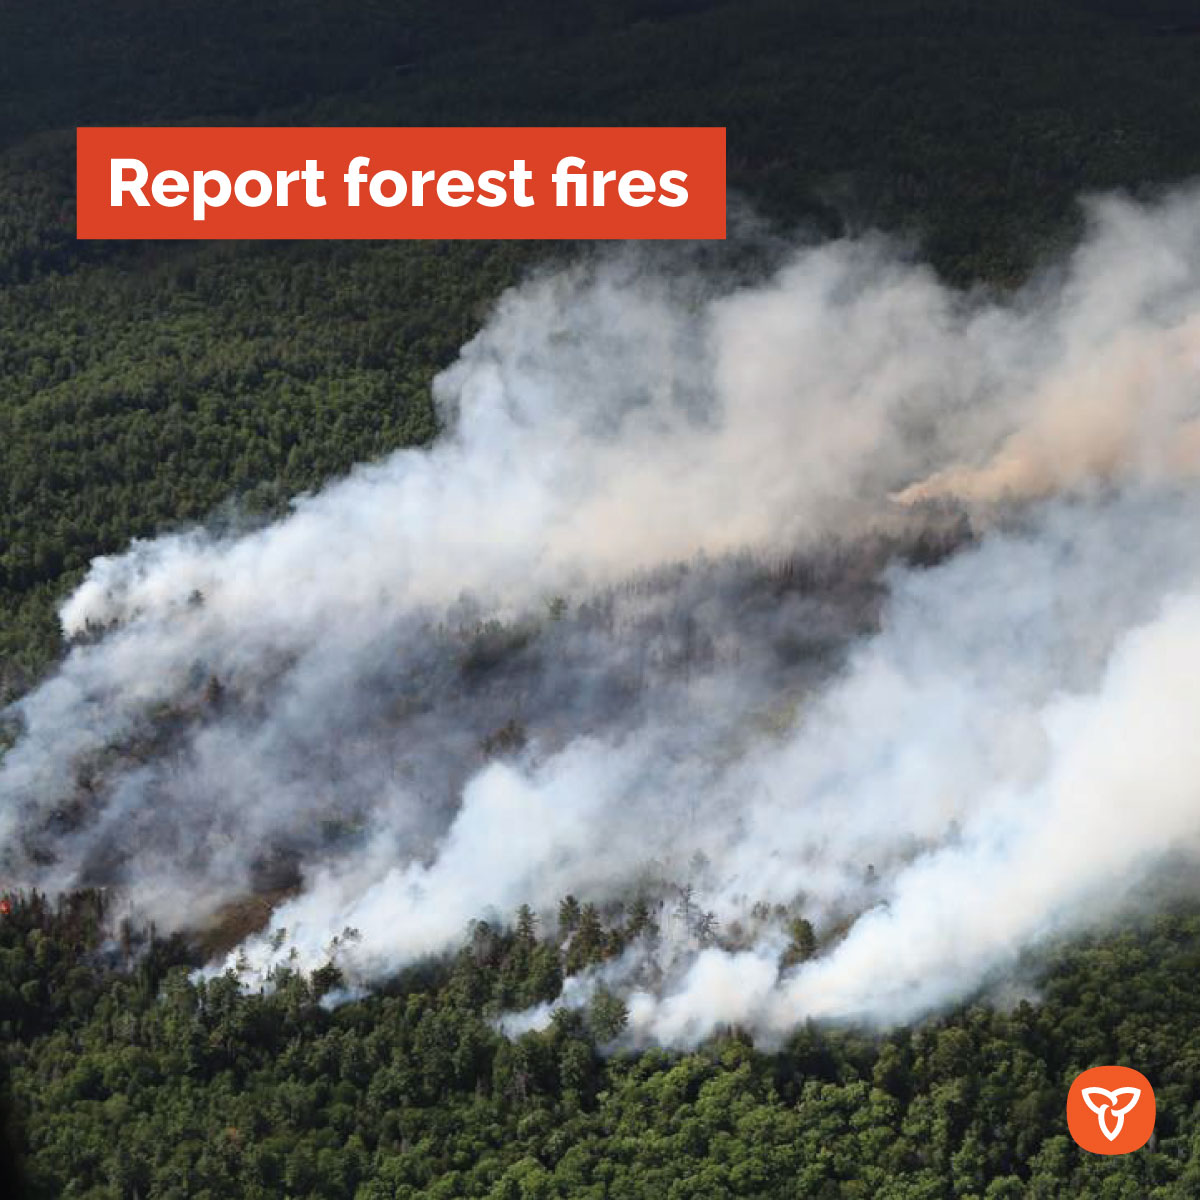 When you see a forest fire, who do you call? If you are north of the French and Mattawa Rivers, call 310-FIRE (3473). If you are south of the French and Mattawa Rivers, call 911. Learn more: ontario.ca/ForestFires @ONForestFires